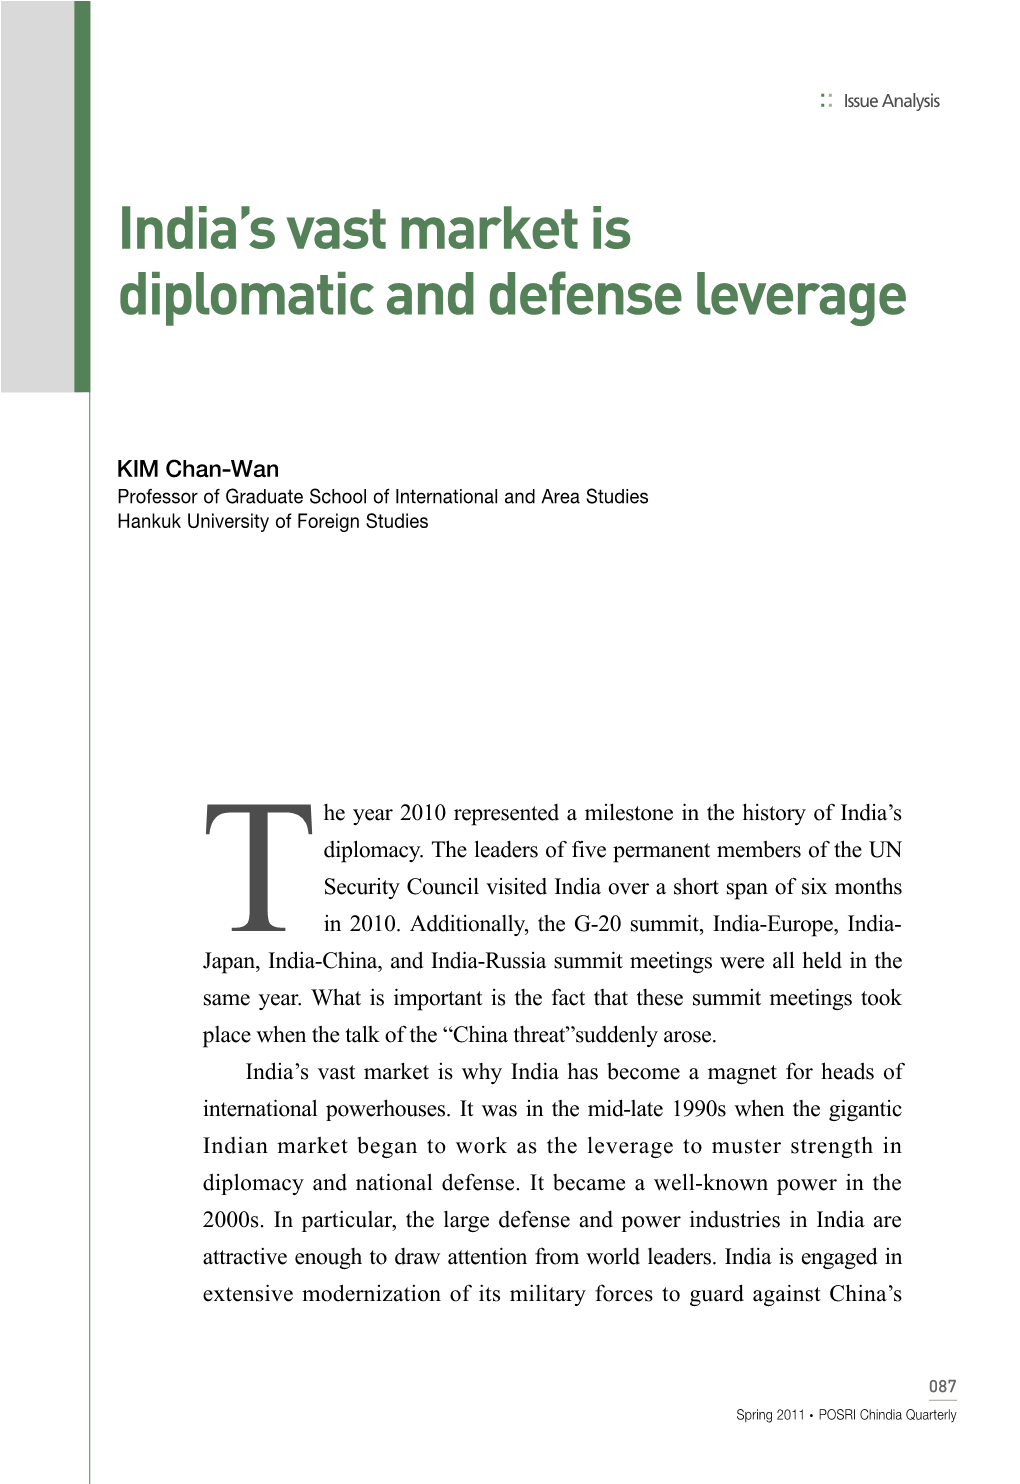 India's Vast Market Is Diplomatic and Defense Leverage